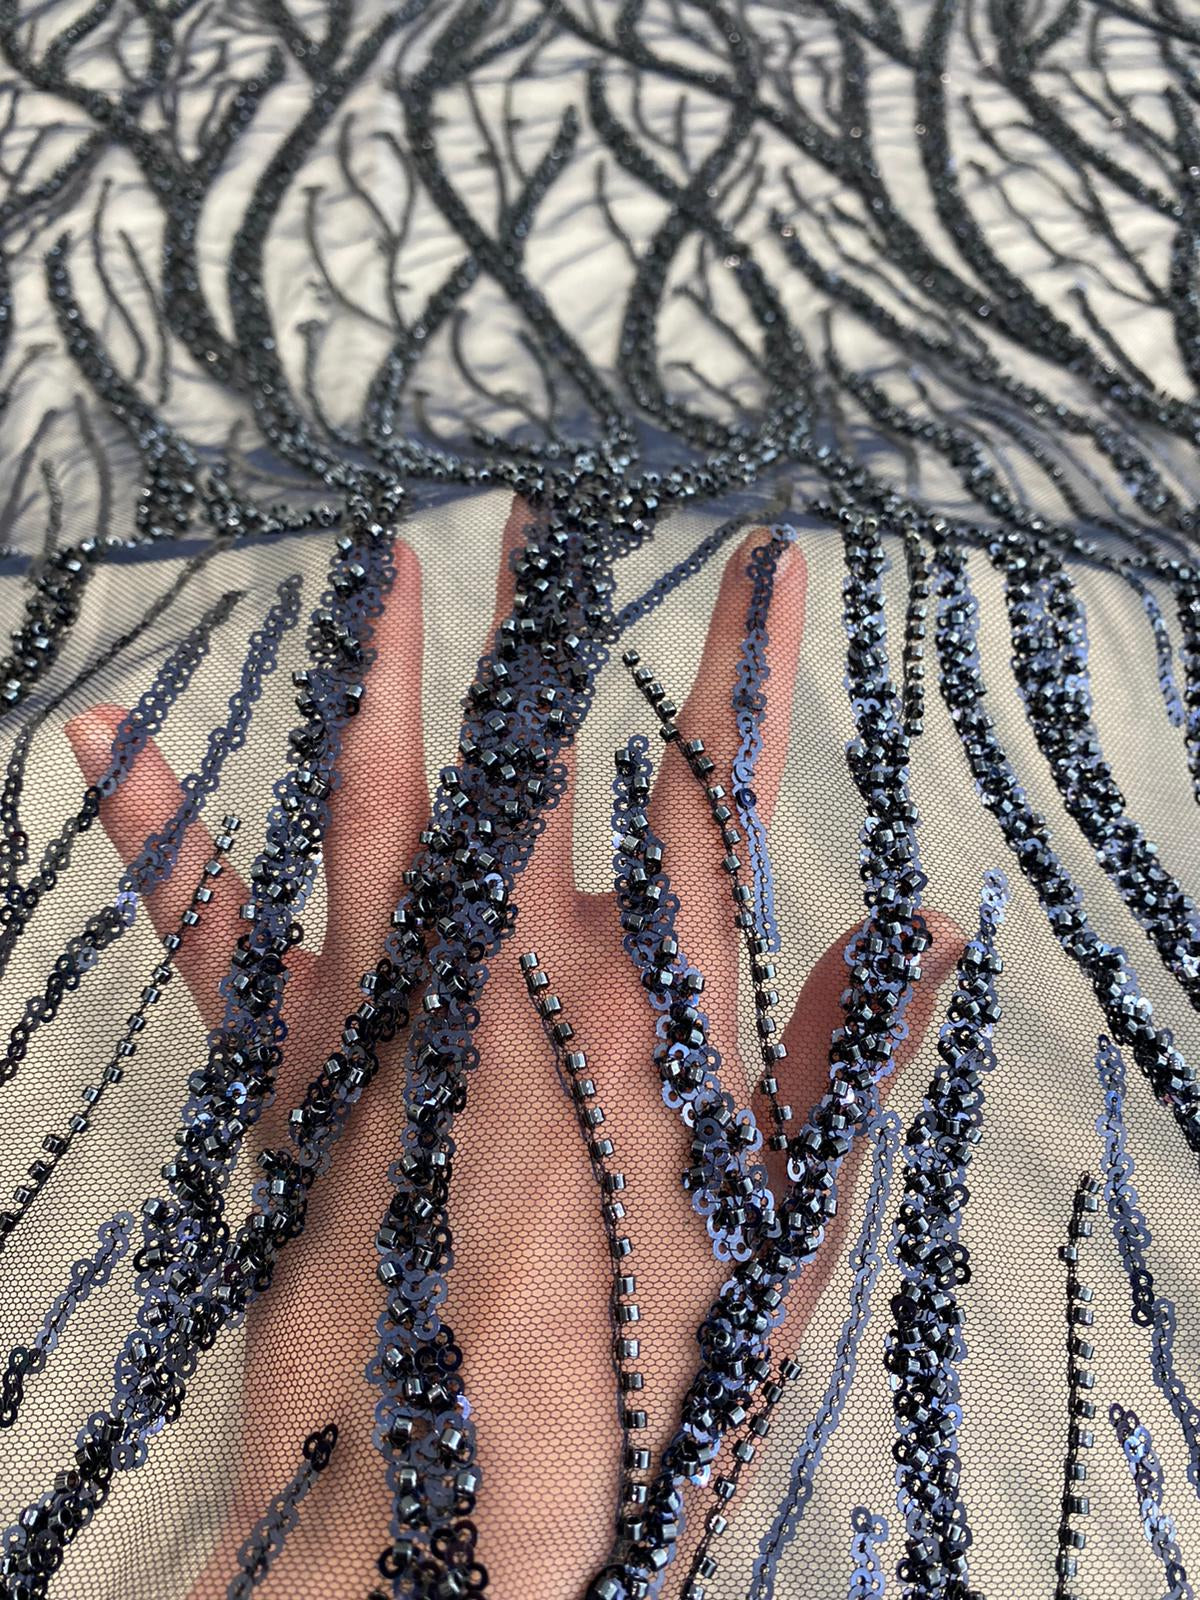 Navy Blue Lace with Strings, Beads and Sequins